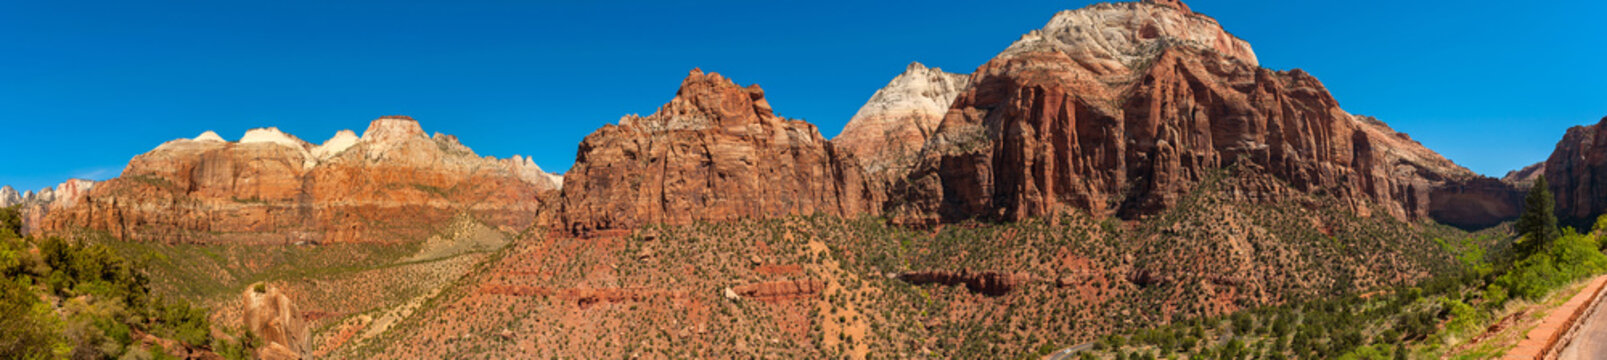 Panoramic View of Zion National Park, Utah. Zion National Park is a southwest Utah nature preserve distinguished by Zion Canyon’s steep red cliffs. Enjoy Zion’s unique array of plants and animals.